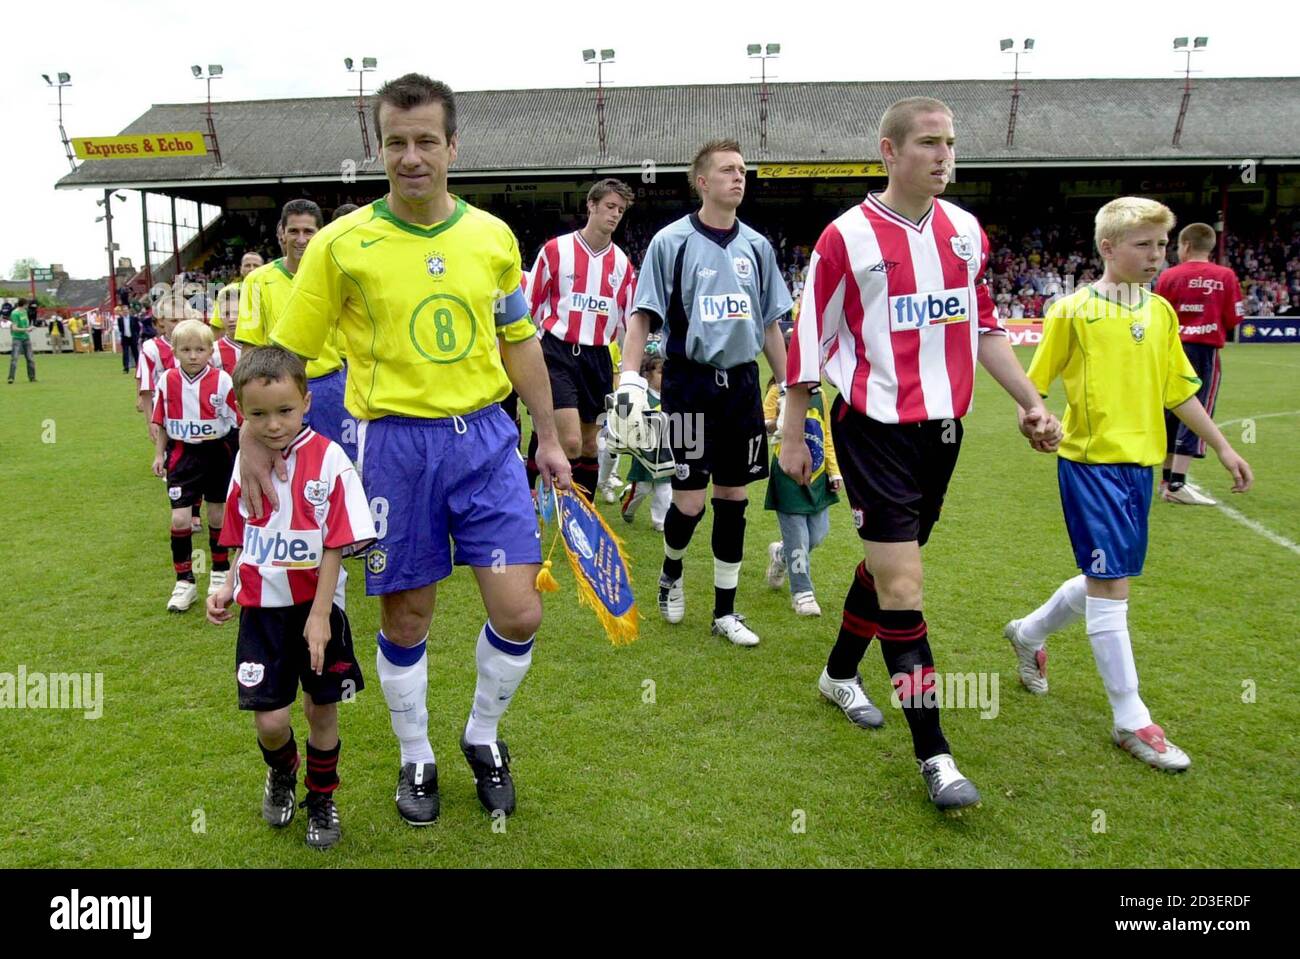 Dunga 2l Of Brazil S 1994 World Cup Winning Soccer Team And Exeter City S Glenn Cronin 2r Lead Out Their Teams And Young Mascots Before Their Friendly Match At The St James Park Ground